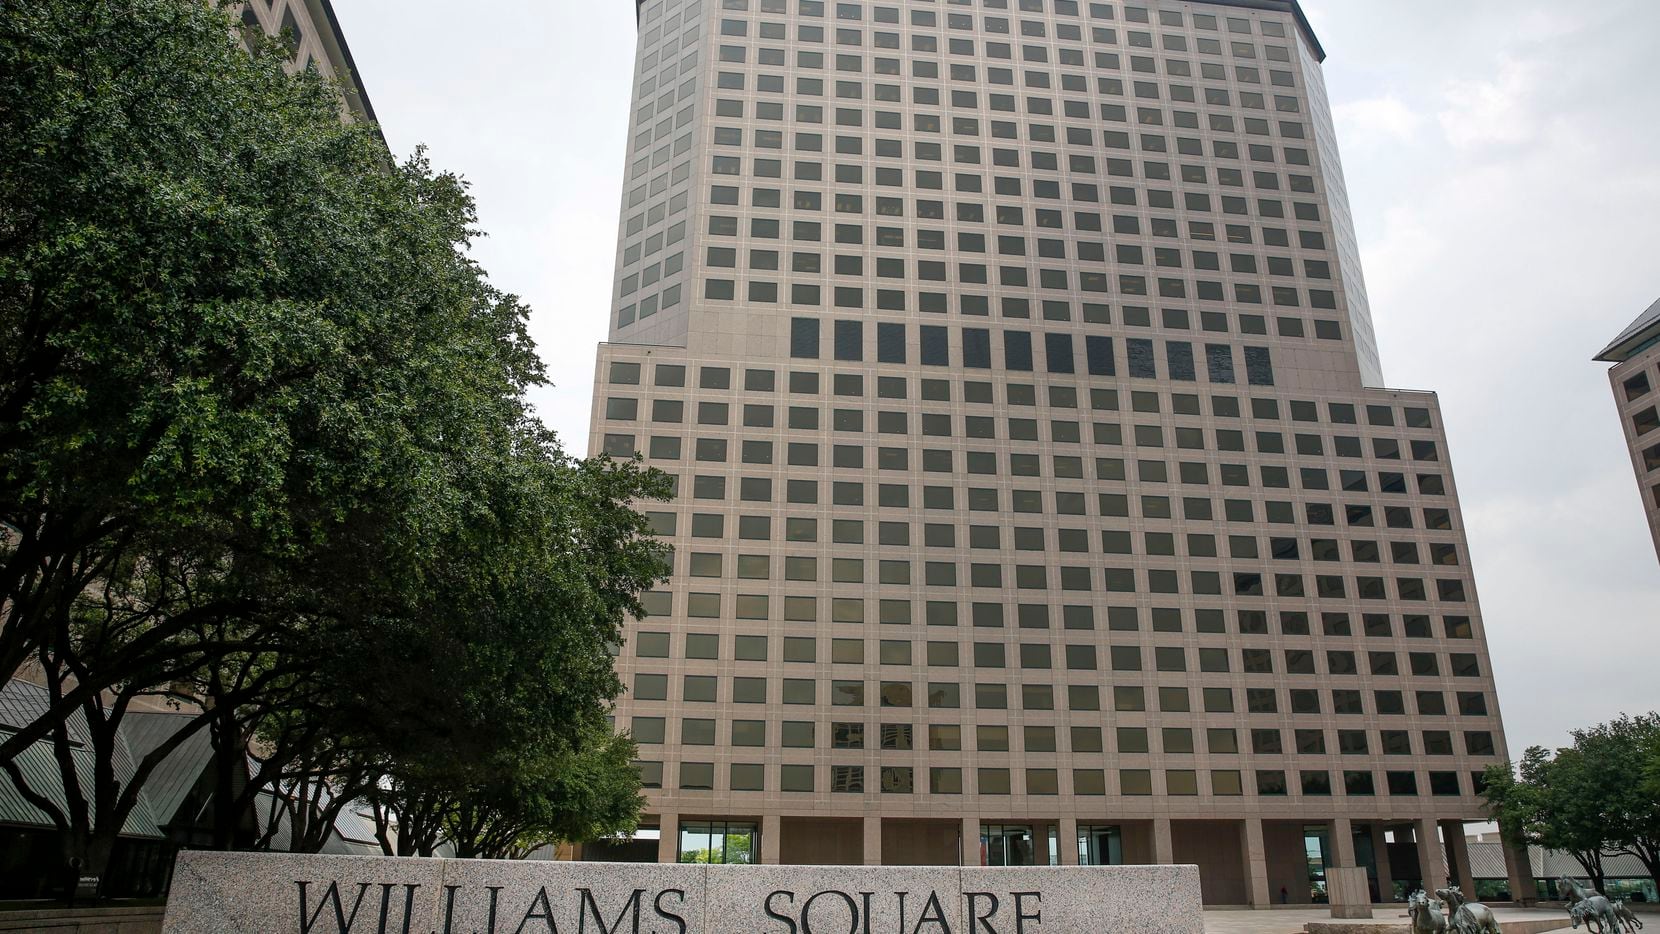 The plaza at The Towers at Williams Square with the iconic mustang sculptures was built in...